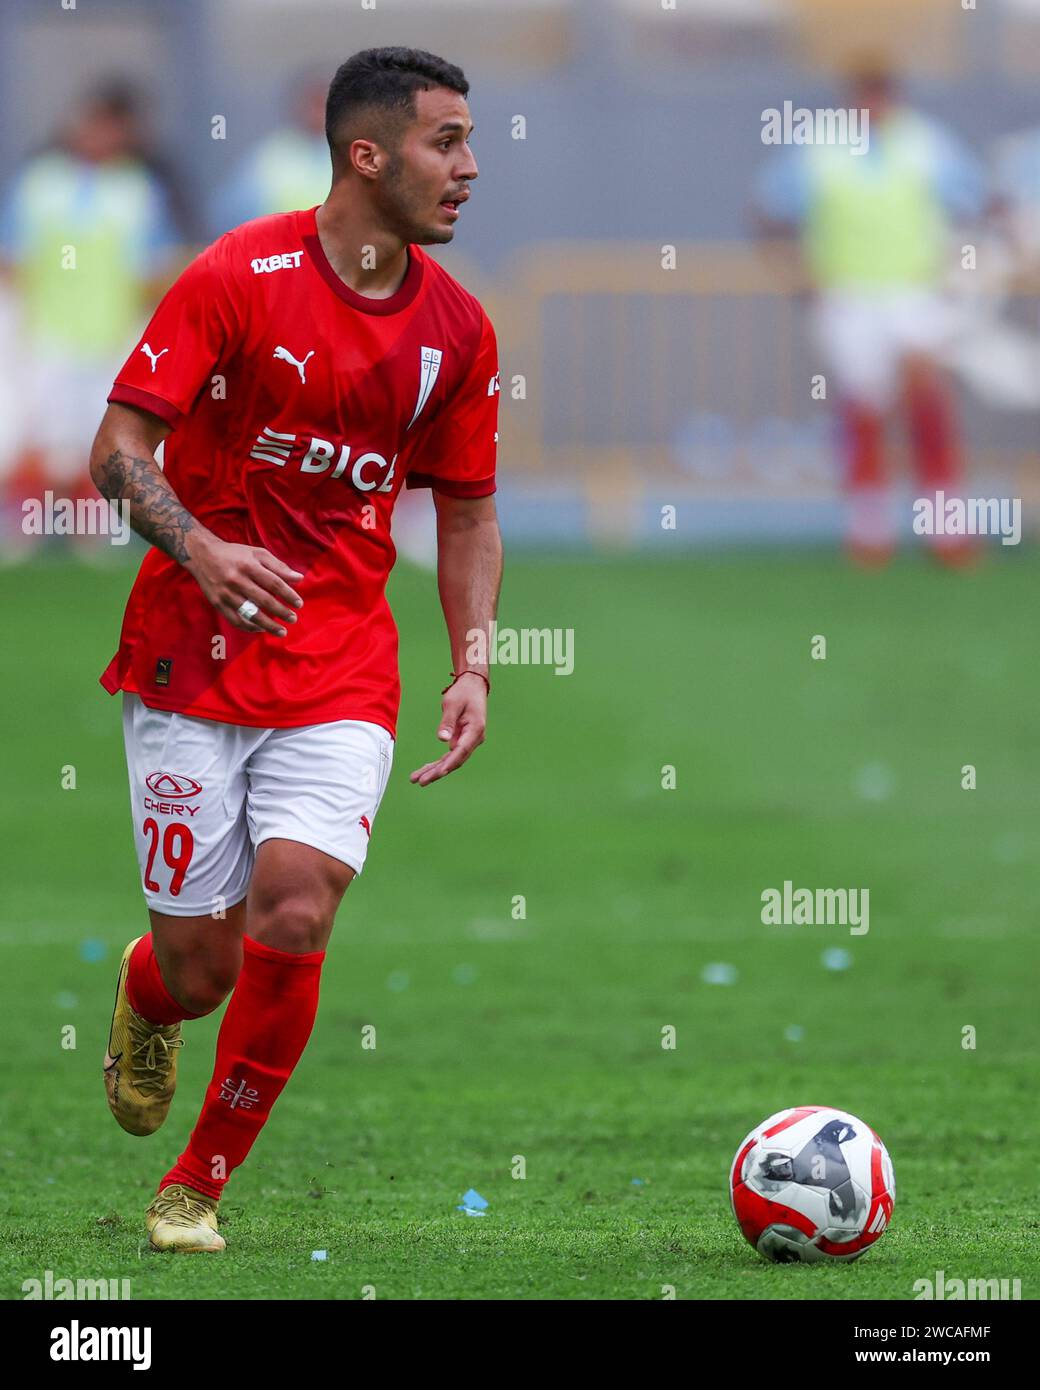 Lima, Peru. 14th Jan, 2024. Aaron Astudillo of Universidad Catolica during the friendly match between Sporting Cristal and Universidad Catolica de Chile played at Nacional Stadium on January 14, 2024 in Lima, Peru. (Photo by Miguel Marrufo/PRESSINPHOTO) Credit: PRESSINPHOTO SPORTS AGENCY/Alamy Live News Stock Photo